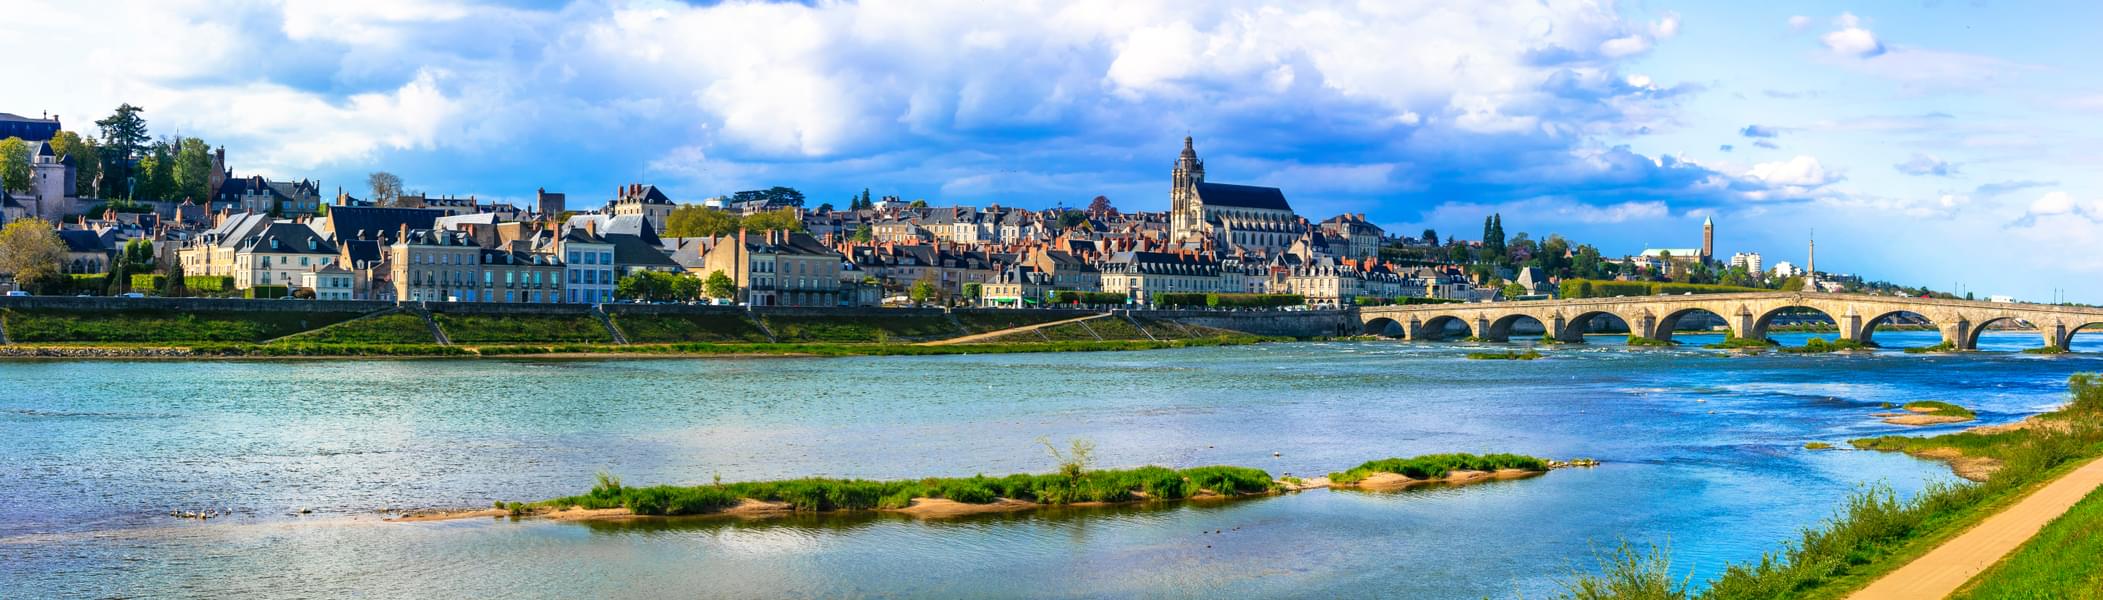 Visit the Royal Chateau of Blois, a historic landmark offering a magnificent sight 